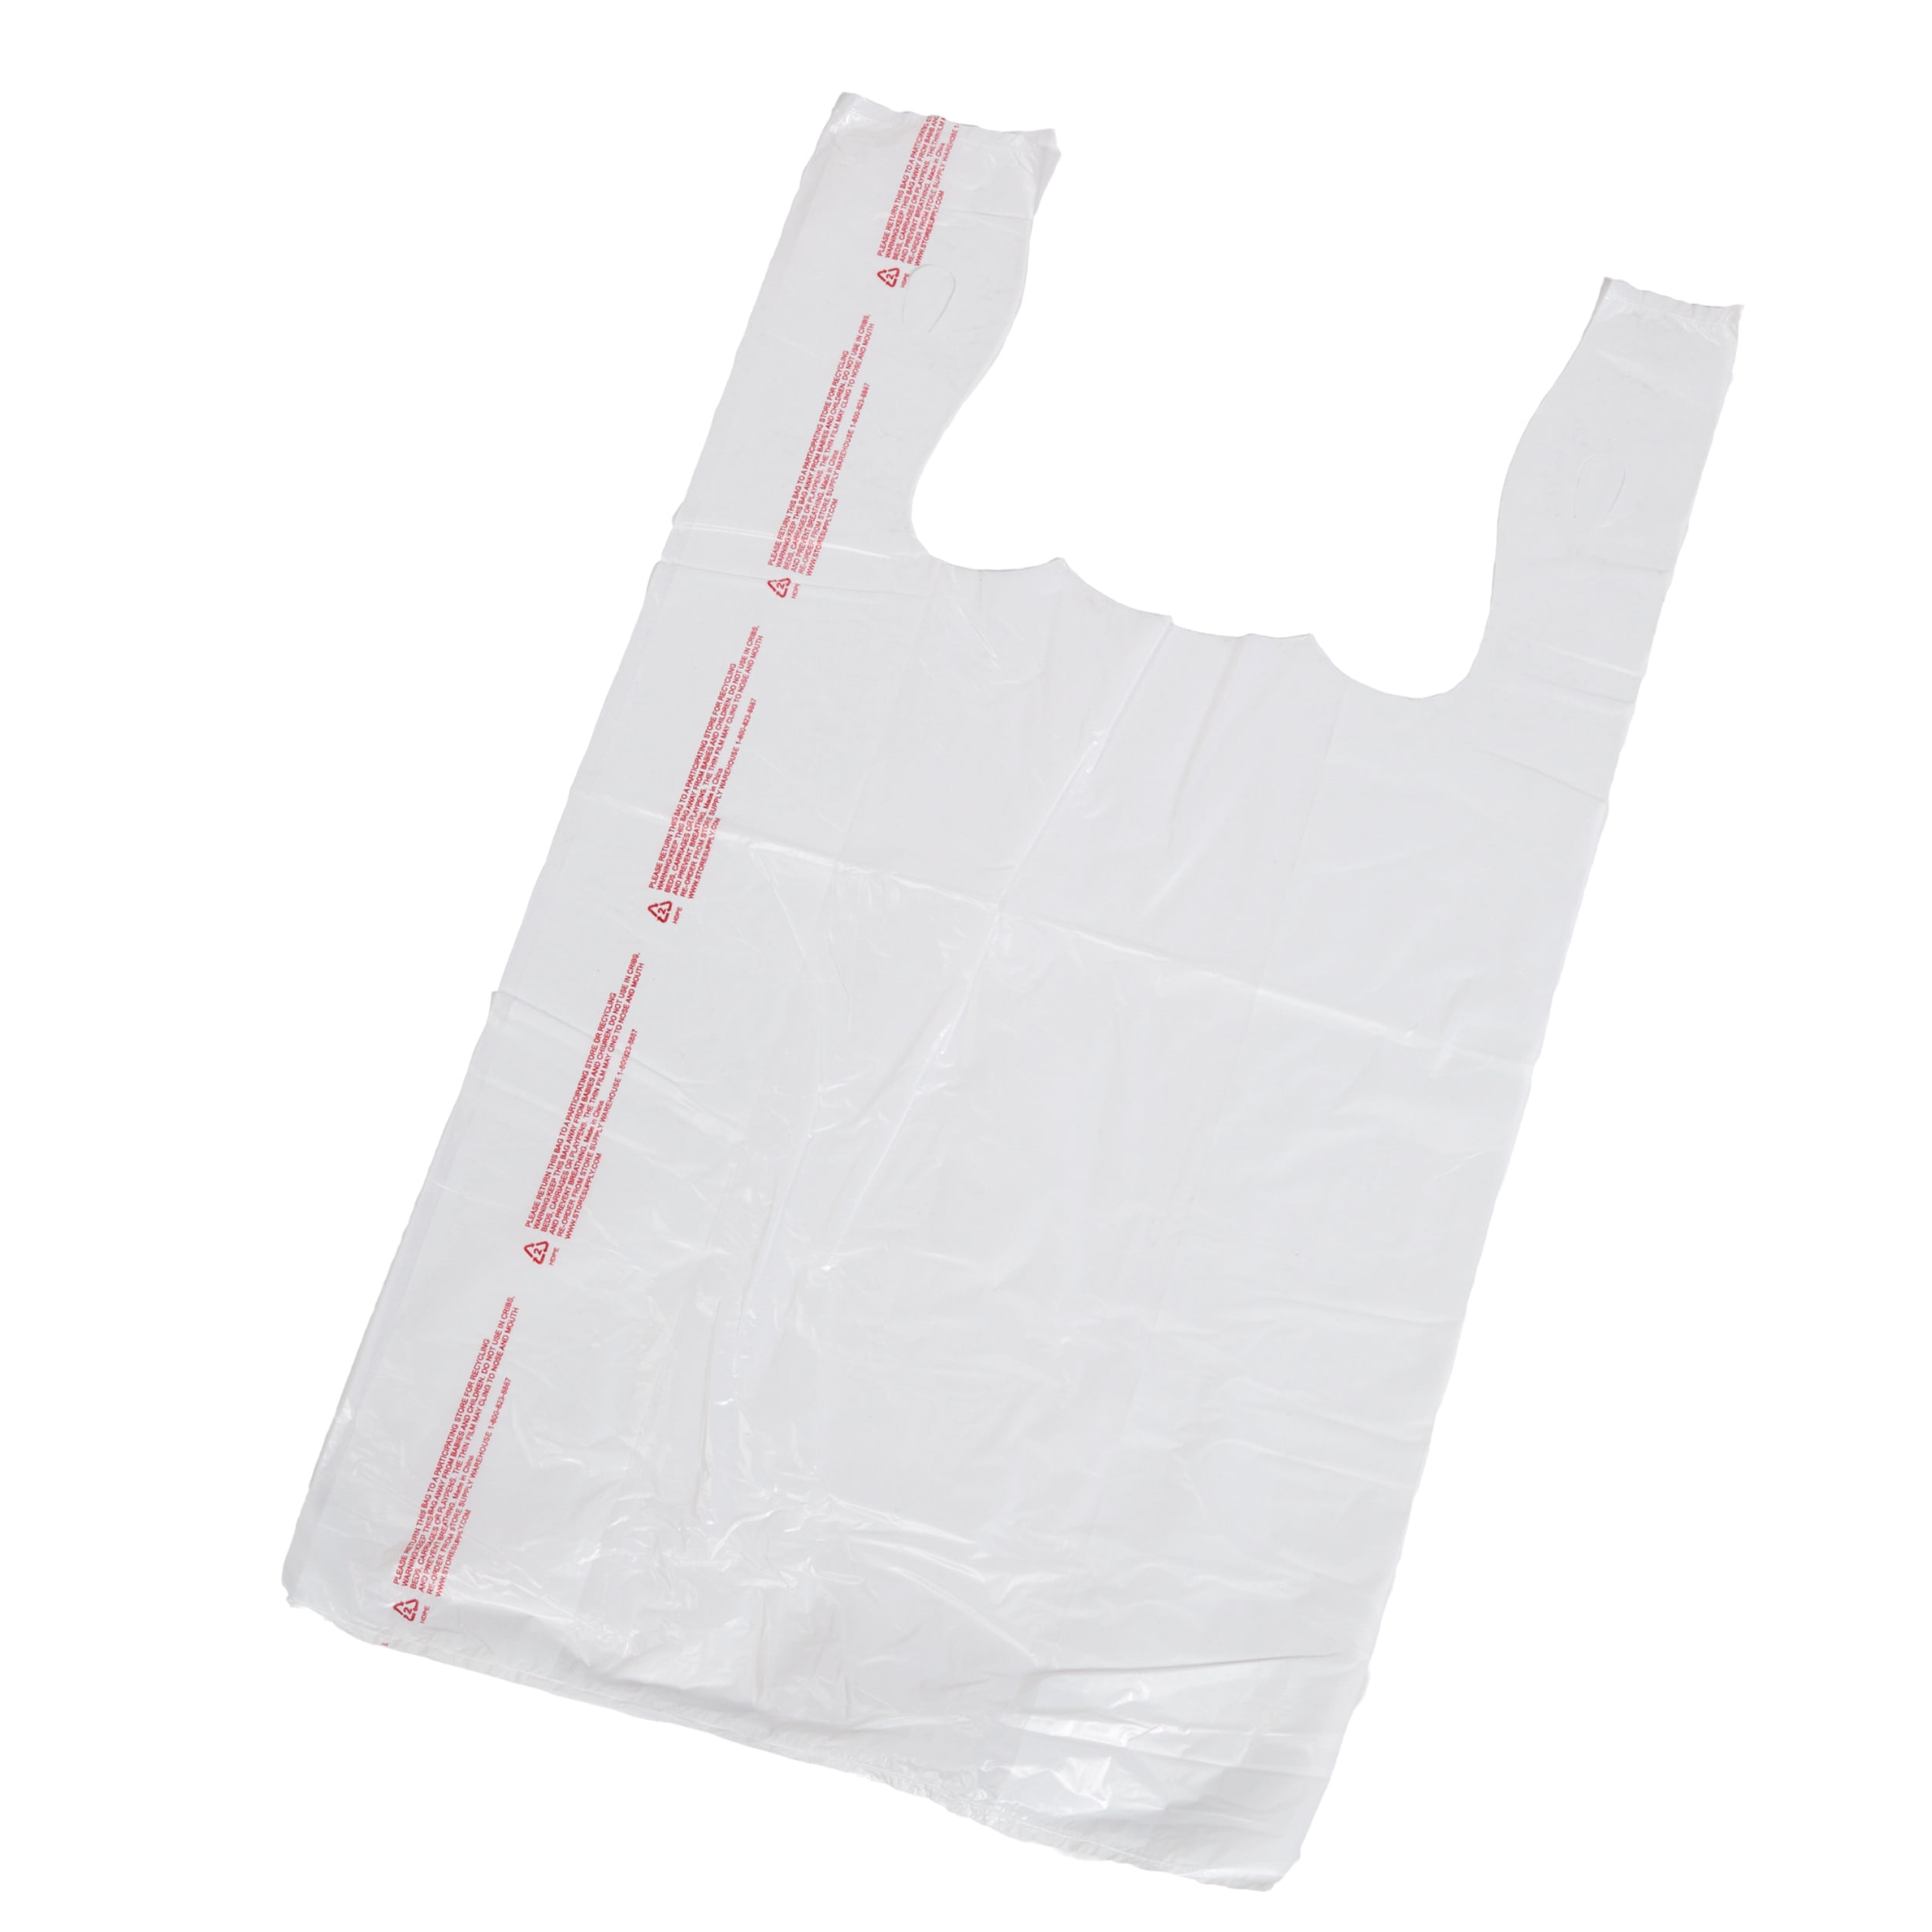  Reli. Plastic Bags Thank You (1000 Count)  White Grocery Bags,  Plastic Shopping Bags with Handles : NOT A BOOK: Industrial & Scientific